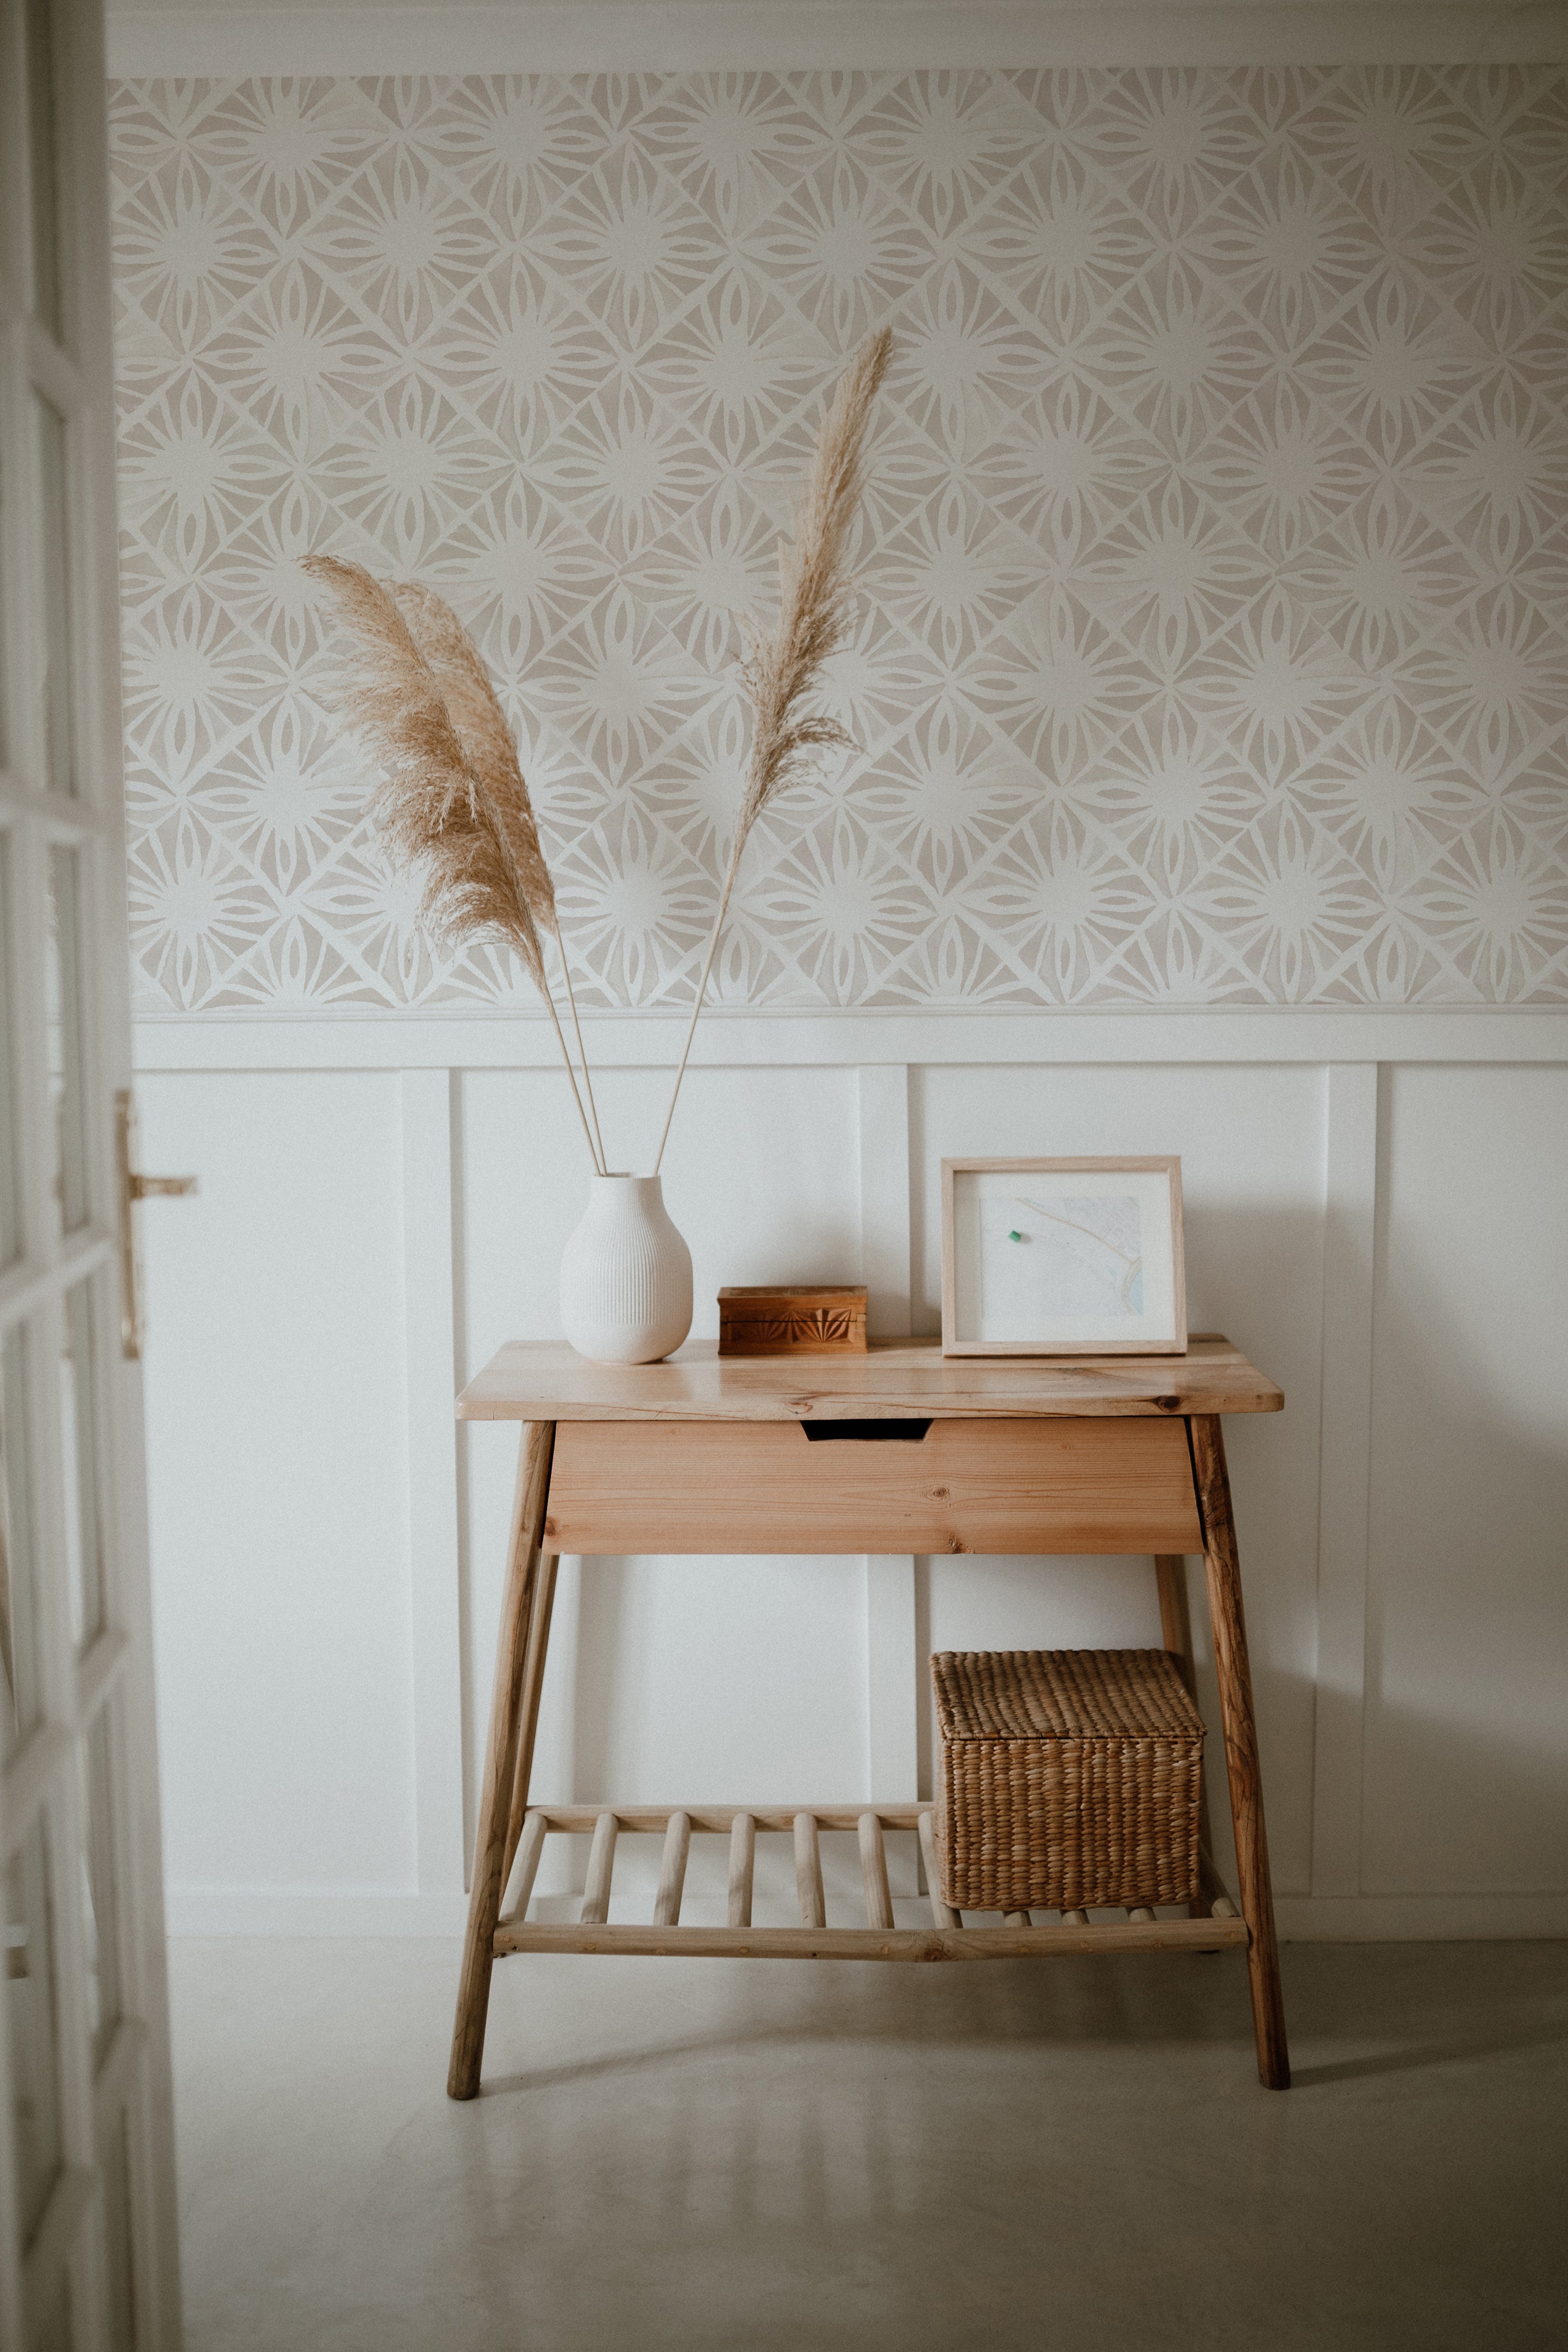  serene workspace with Moroccan Tile Wallpaper II - Linen, showcasing a soft beige geometric pattern, complemented by a natural wooden desk, a textured vase with pampas grass, and simplistic framed artwork, creating a warm and inviting atmosphere.